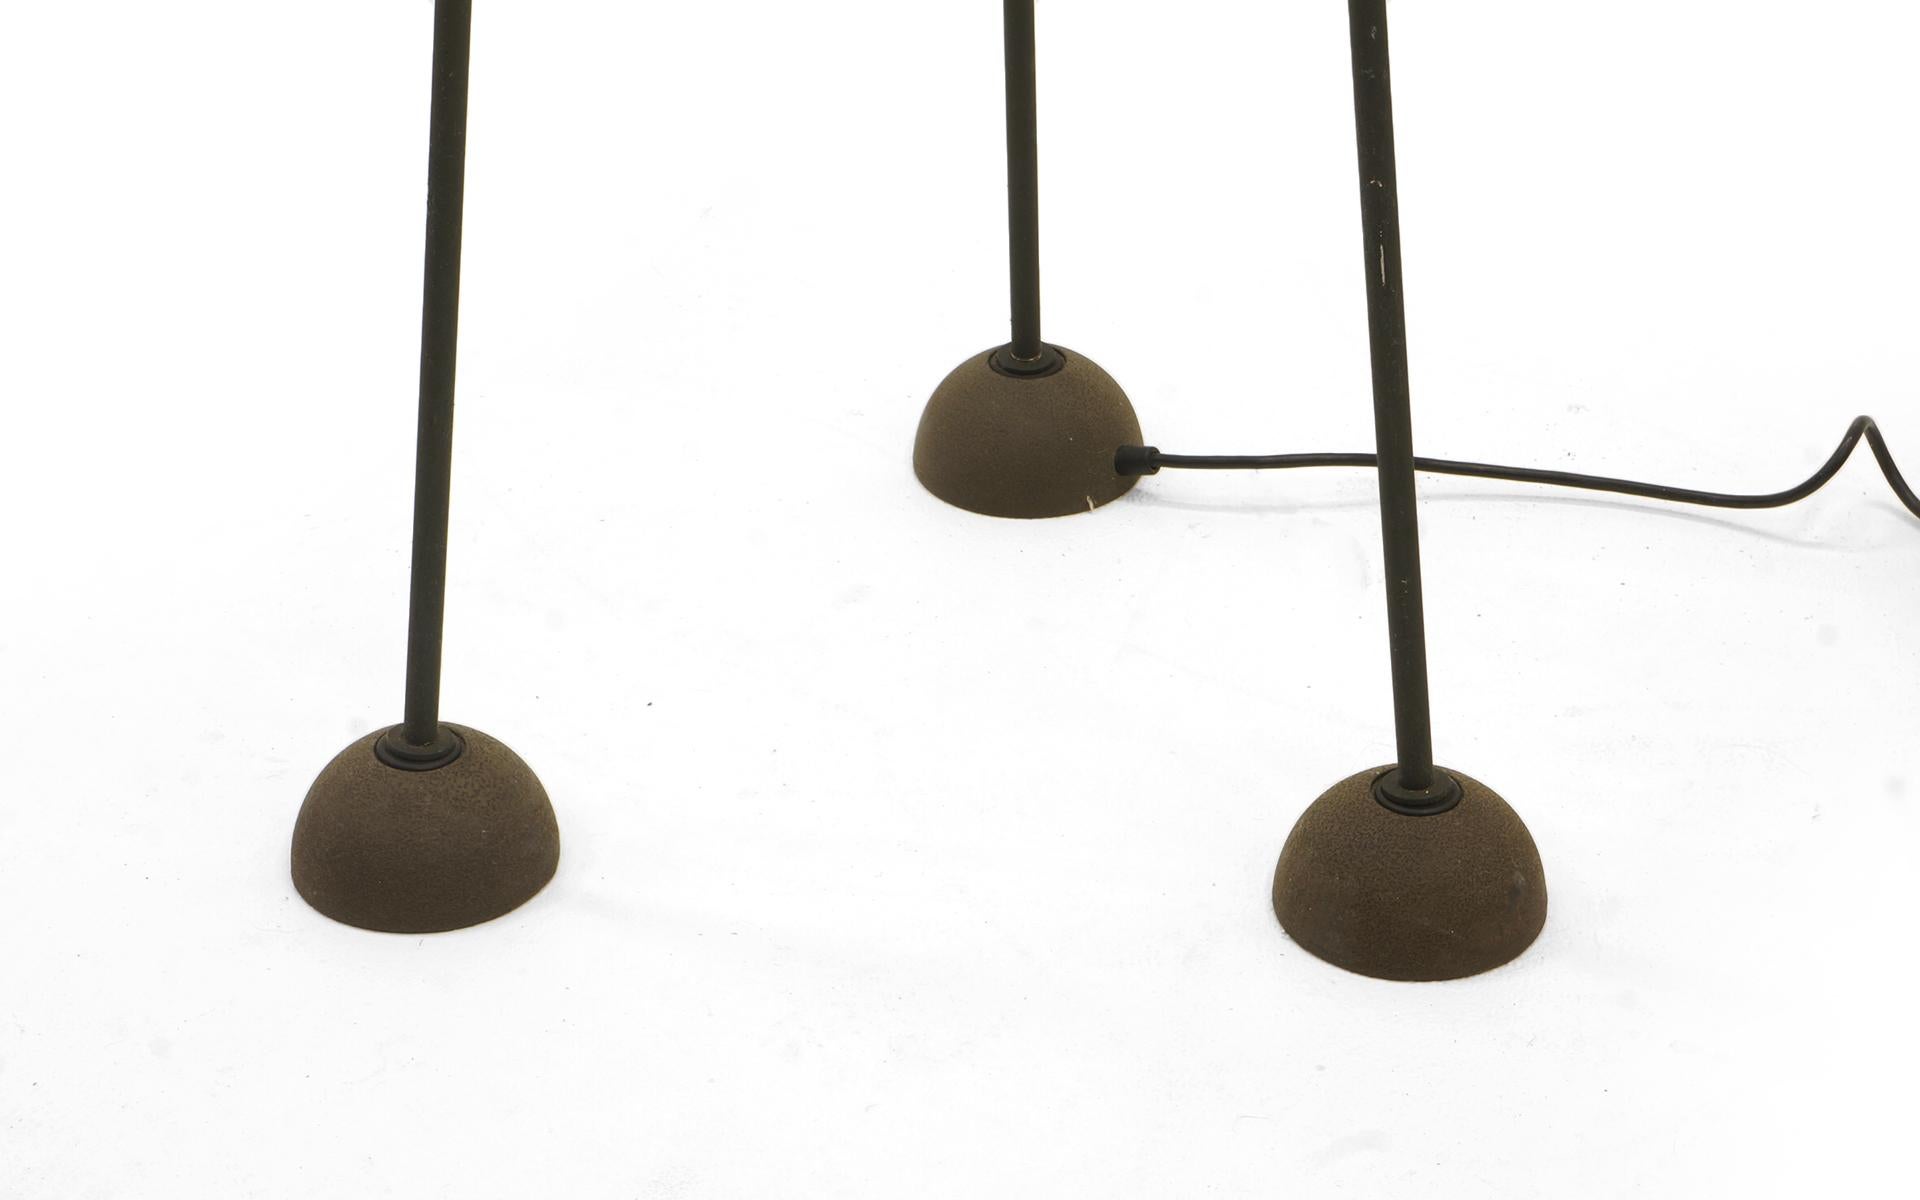 American Pair of Floor Lamps by Koch and Lowy, Black Tripod Stands with Halogen Fixtures For Sale